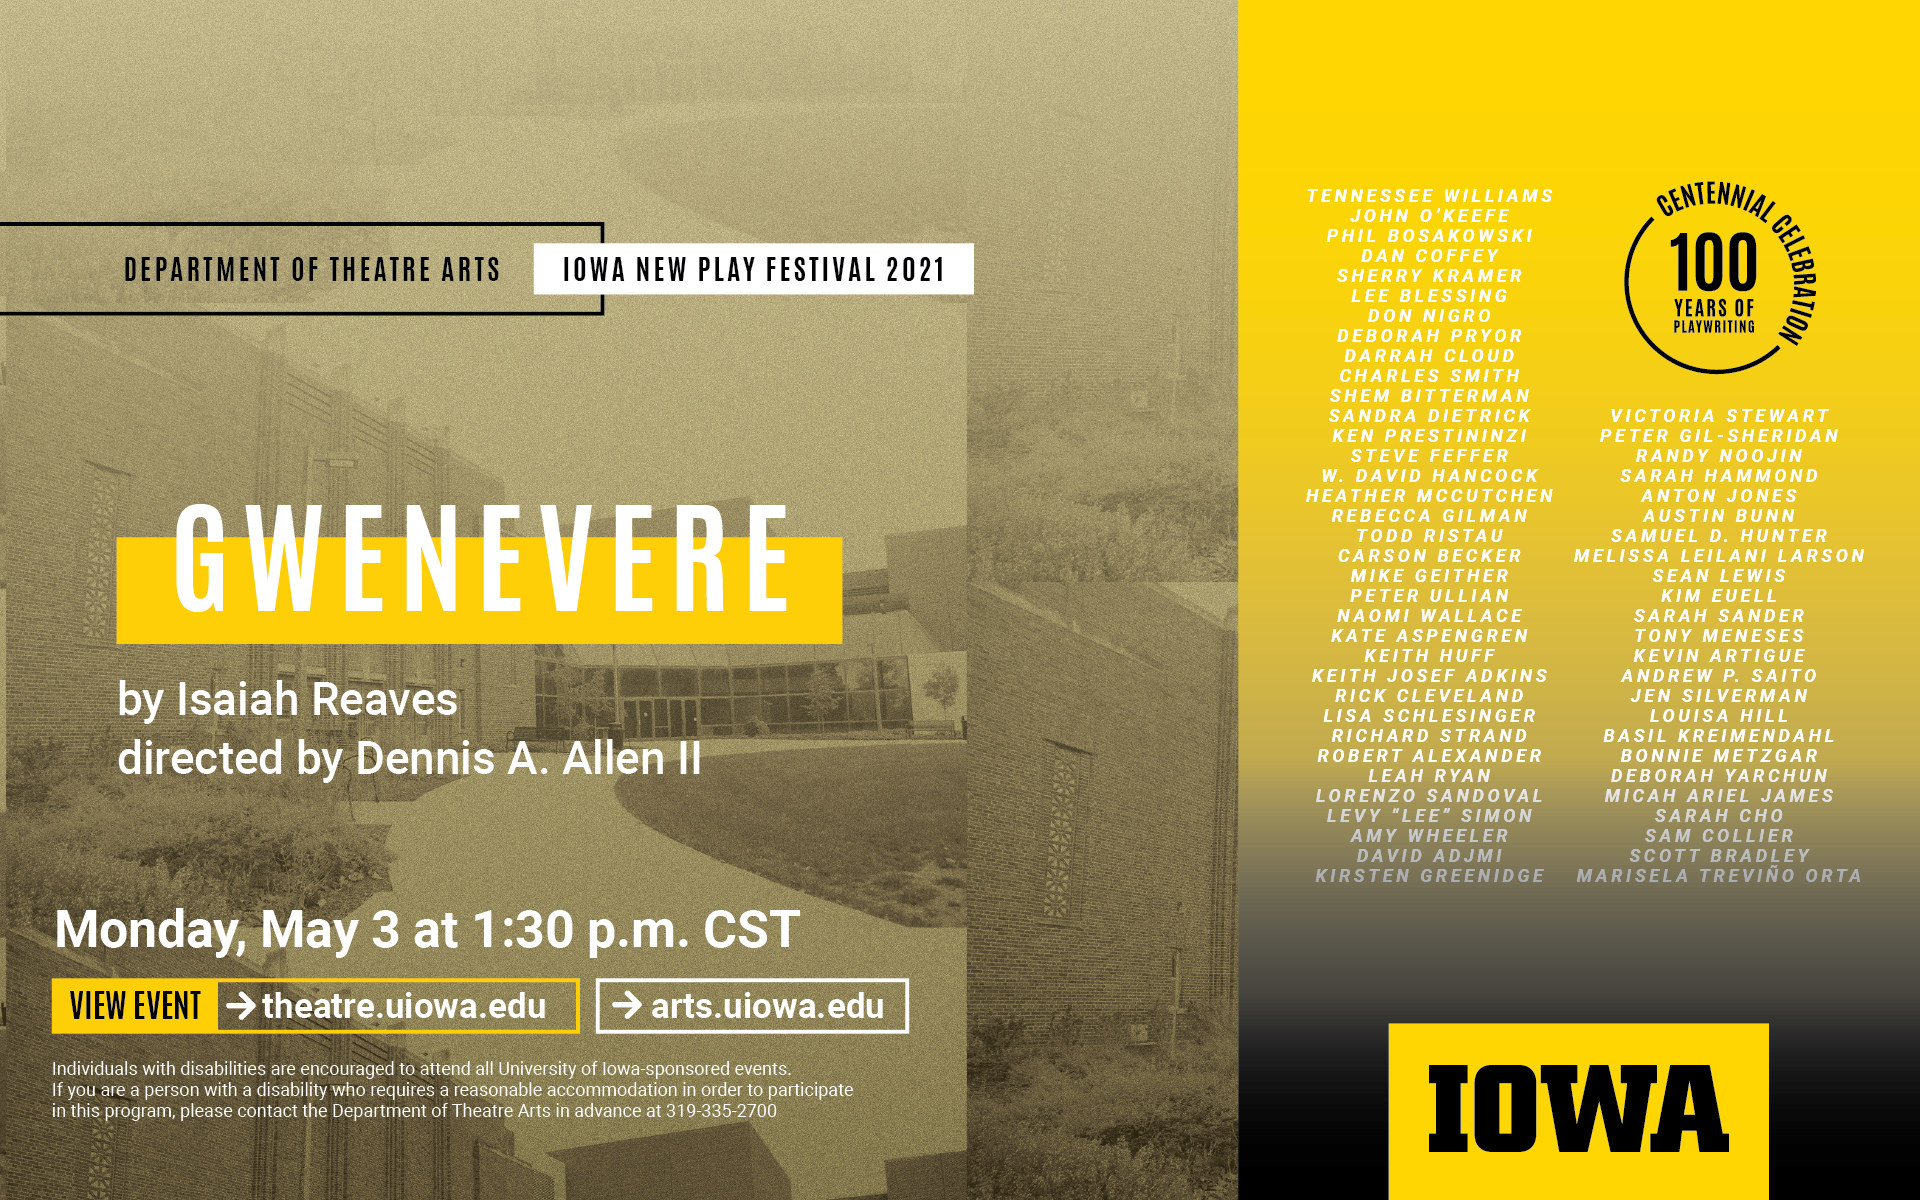 Gwenevere by Isaiah Reaves, directed by Dennis A. Allen II. Monday, May 3 at 1:30 p.m. theatre.uiowa.edu